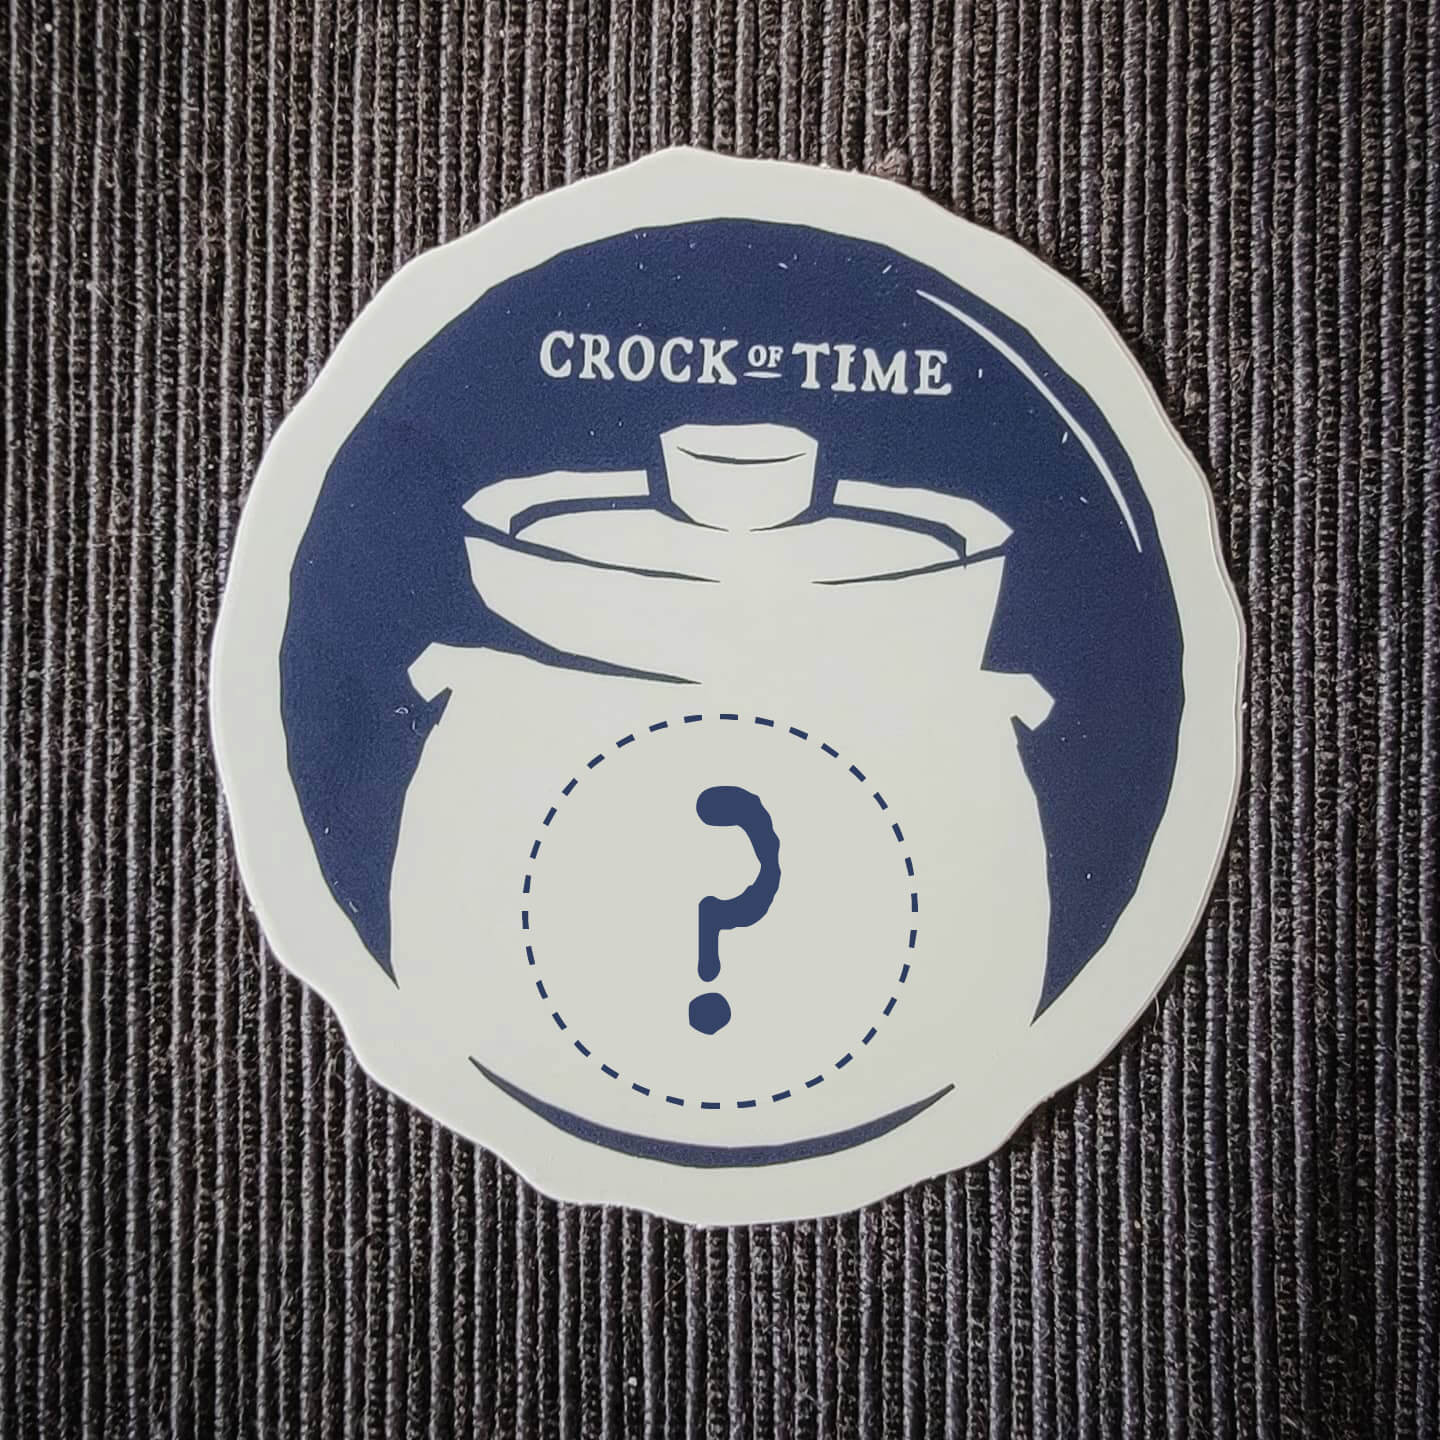 Crock of Time sticker with a dashed circle and question mark im place of the hourglass symbol in the logo.